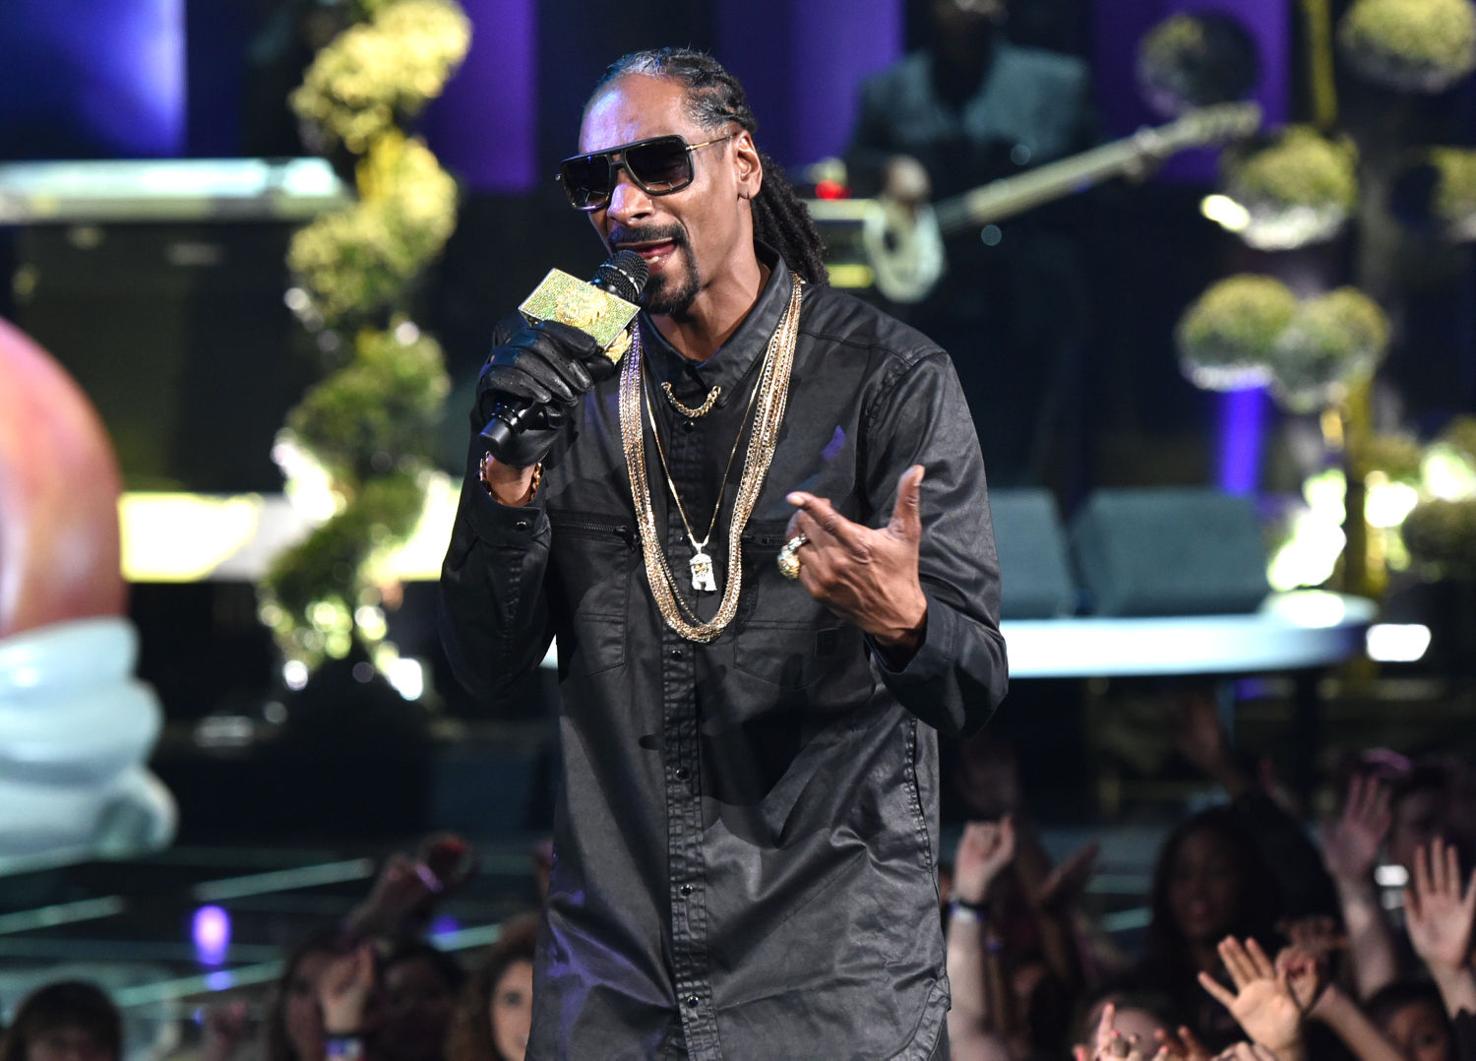 Rapper Snoop Dogg to perform free concert at New York State Fair Sept